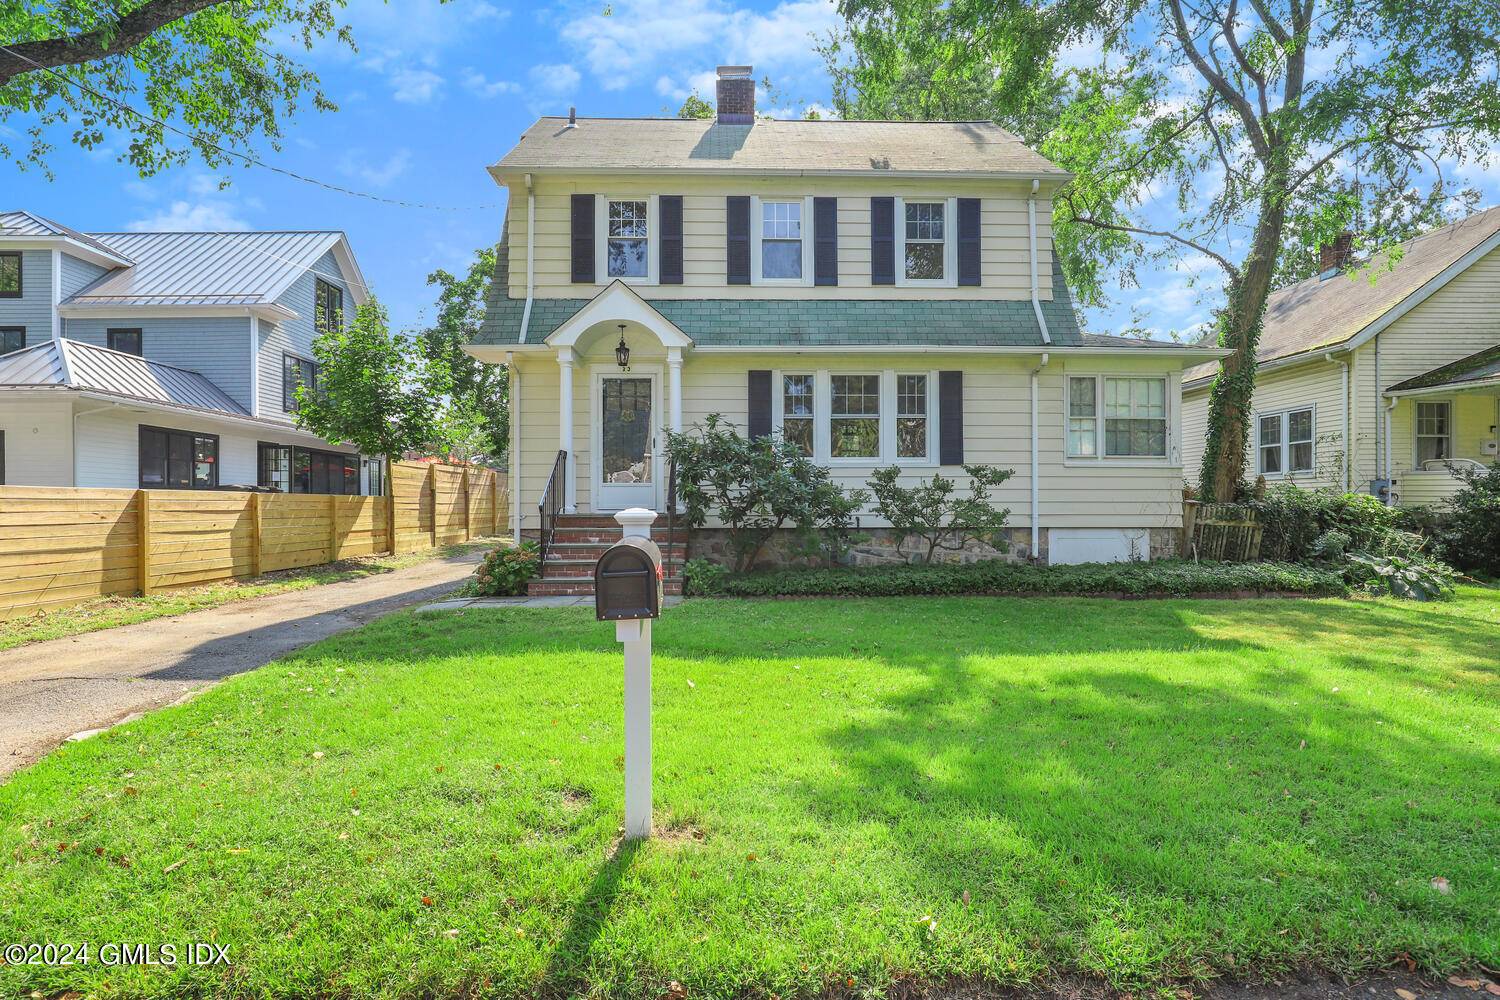 Turnkey three bedroom Colonial showcases stylish renovations on a quiet drive within close distance to schools, Cos Cob shops and just a five minutes to town and trains.